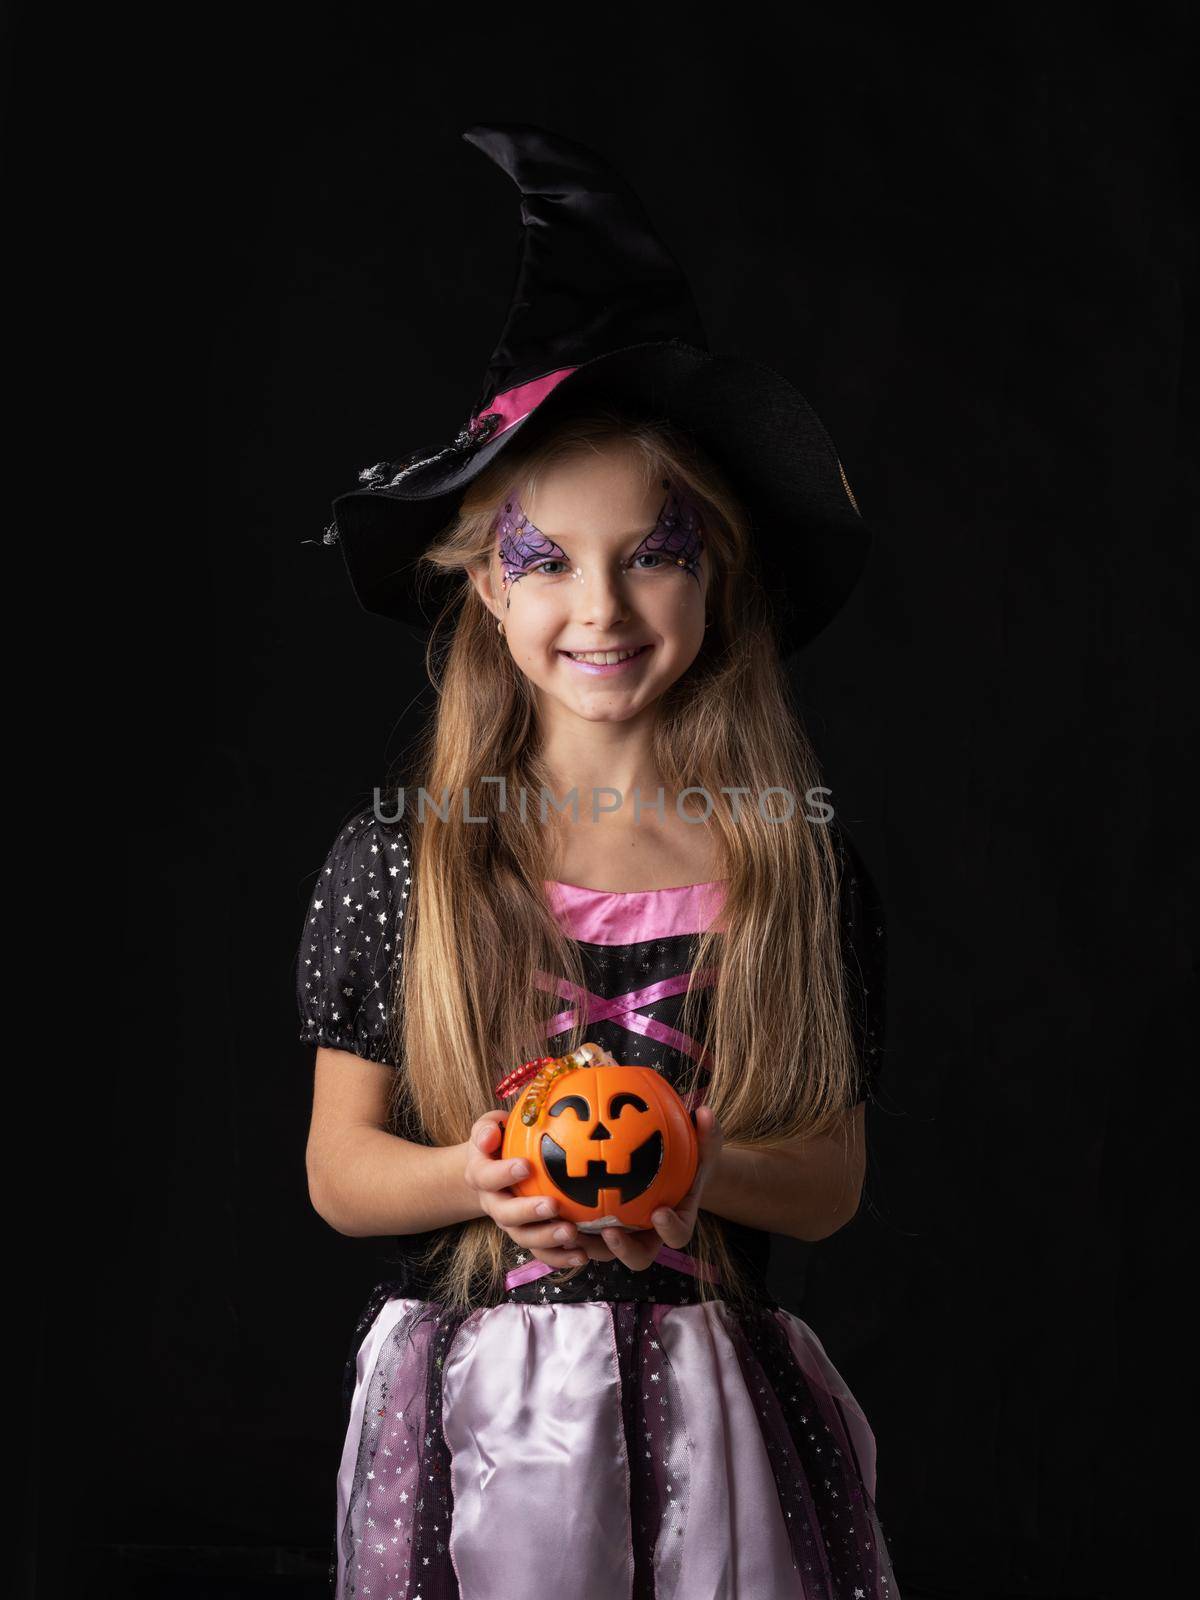 Cute halloween witch girl in fantasy costume holding pumpkin bucket with candy worms, isolated on black background